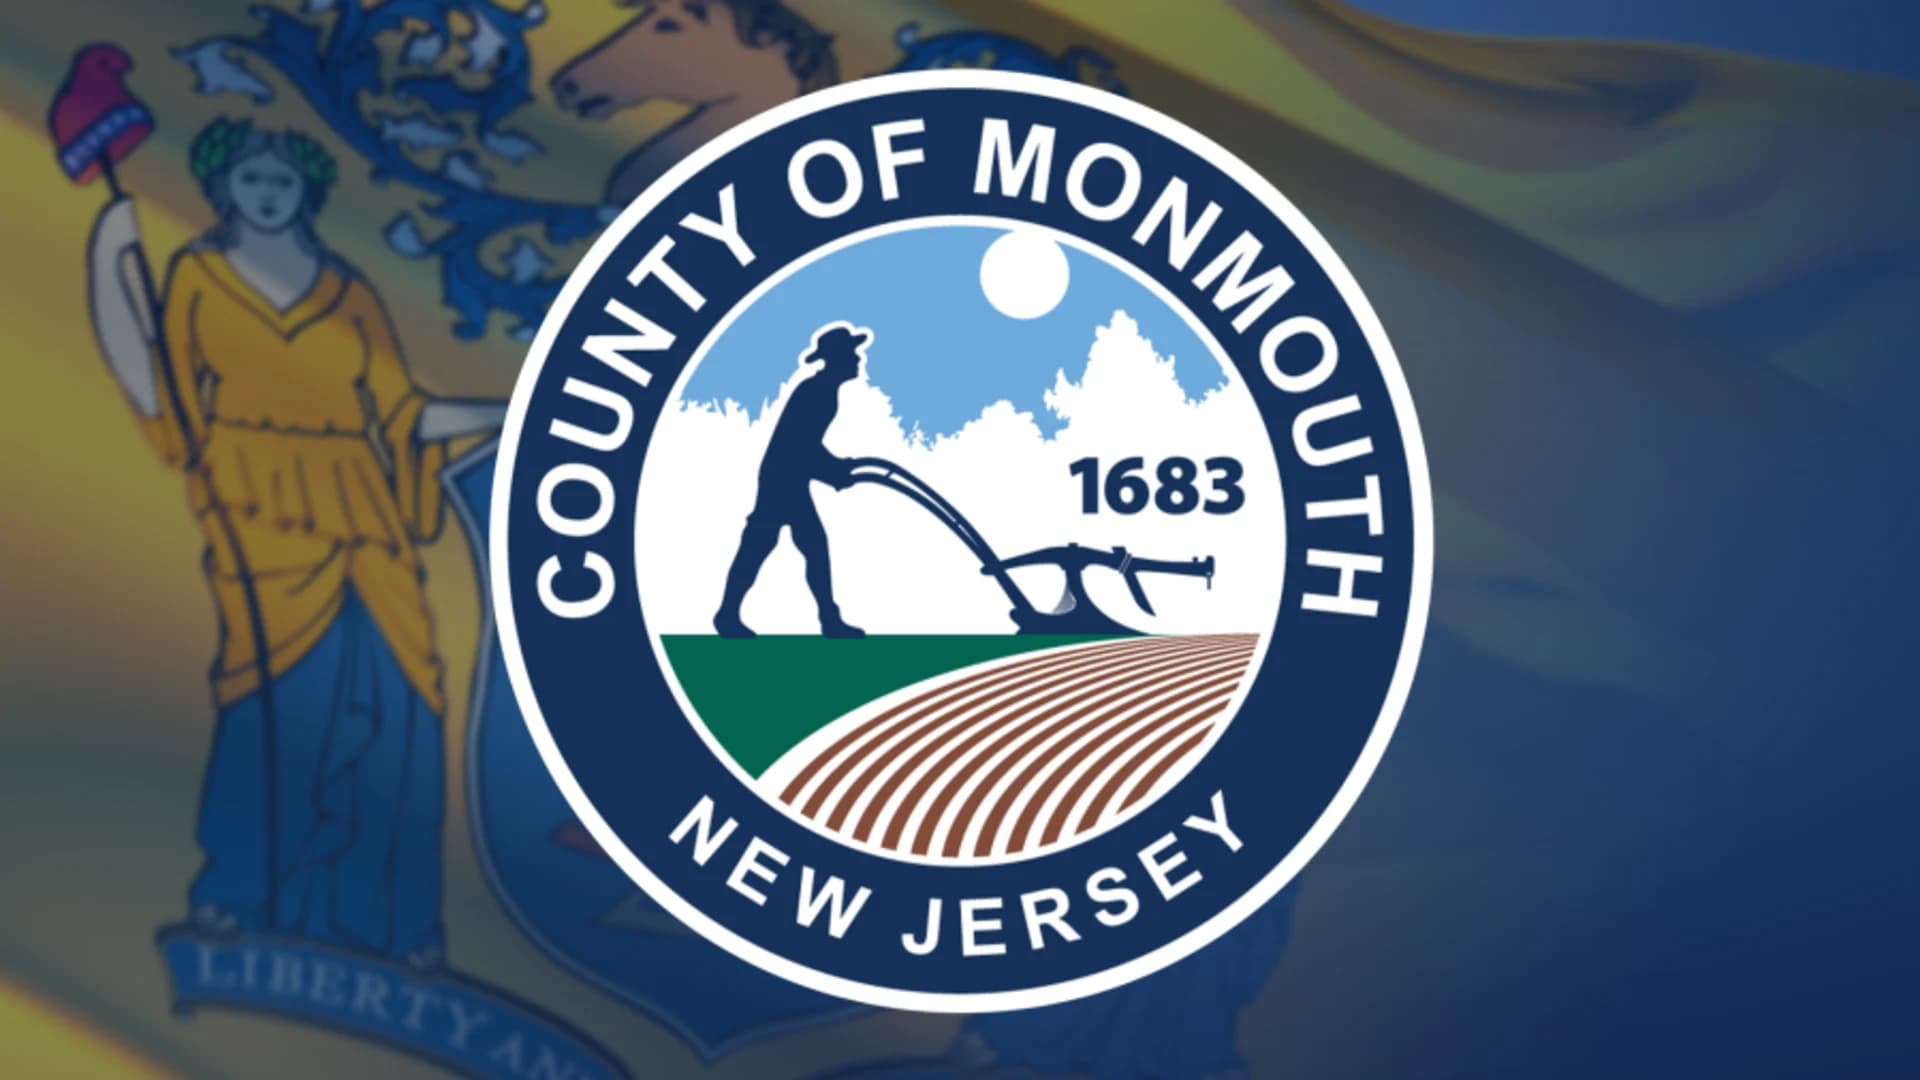 Get beaches open: That remains one of the top priorities of Monmouth County Freeholders